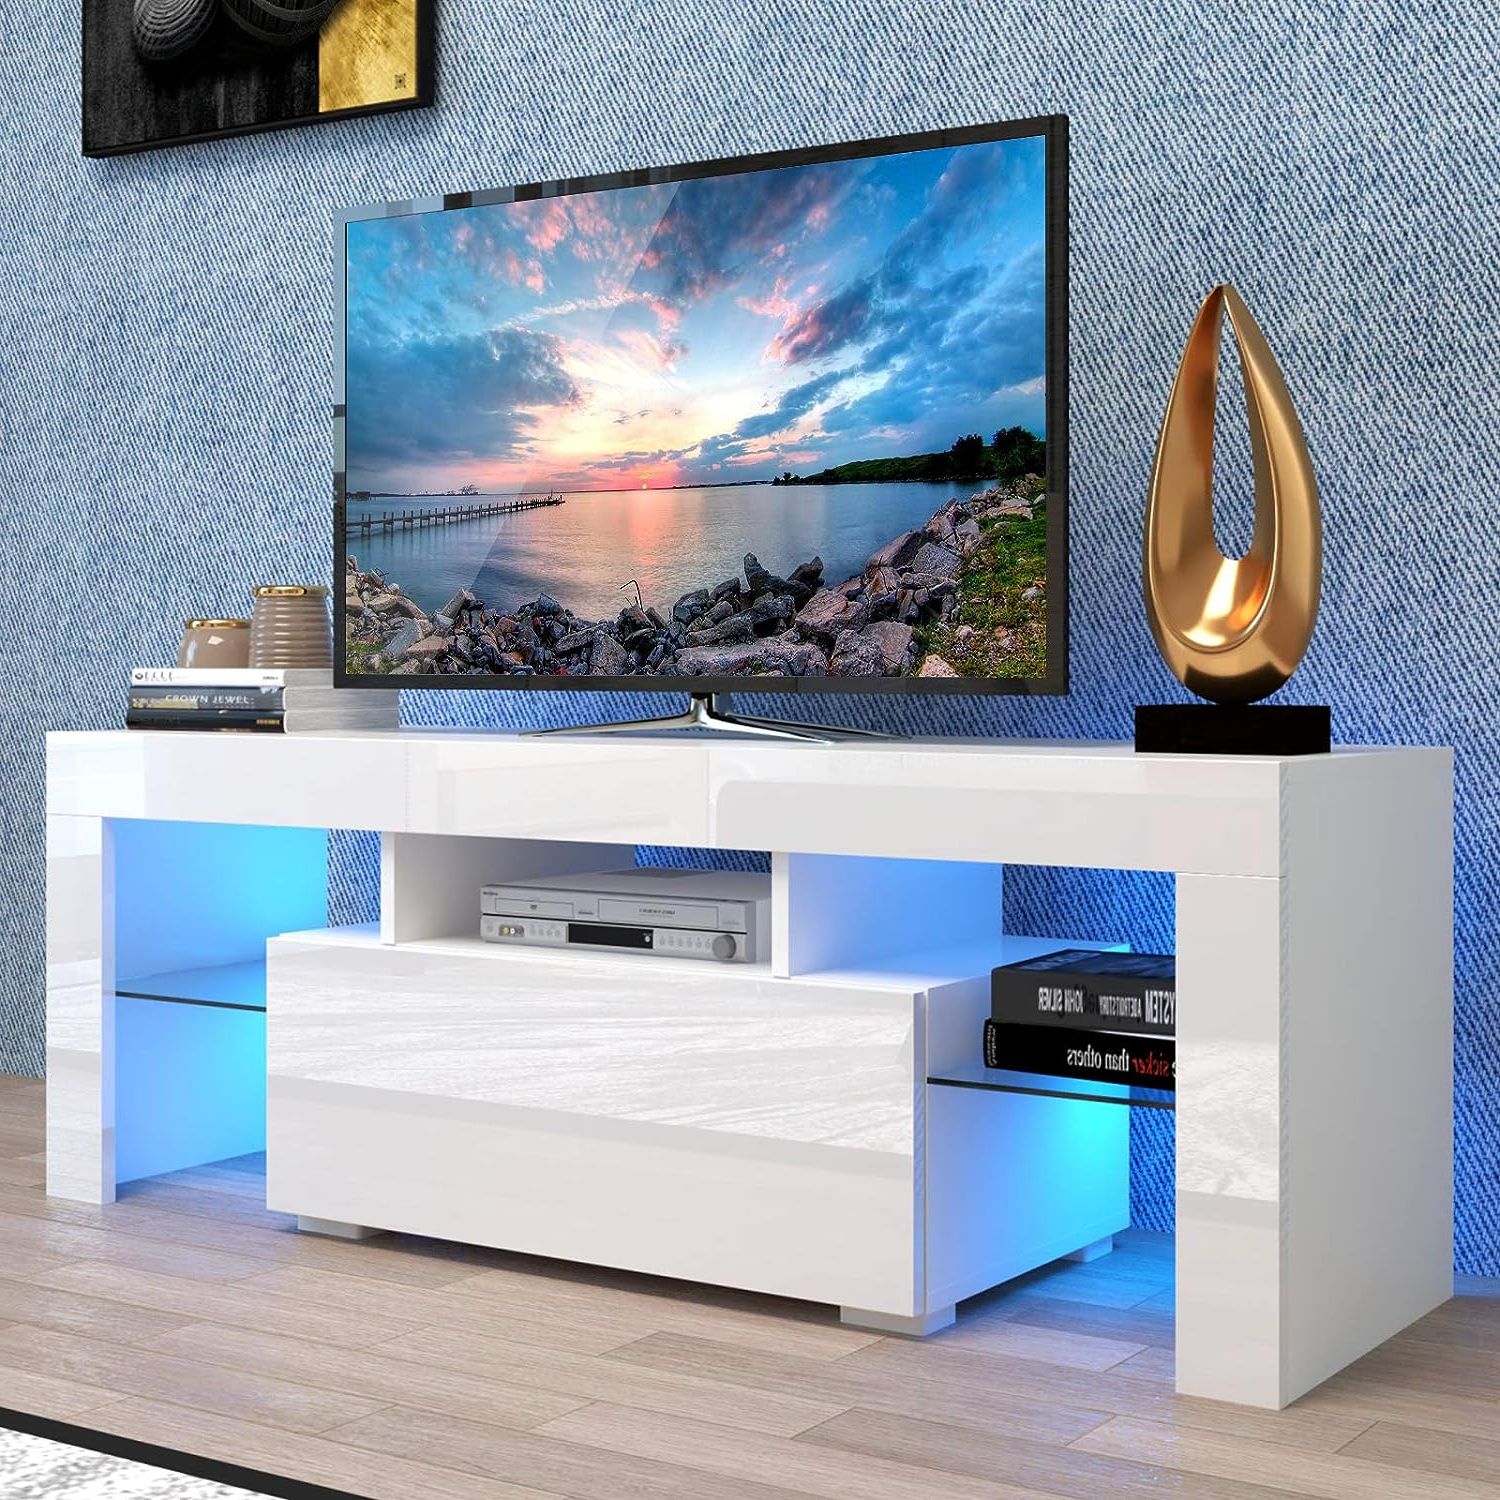 Modern Tv Stand Entertainment Center With 20 Color India | Ubuy With Modern Stands With Shelves (View 11 of 20)